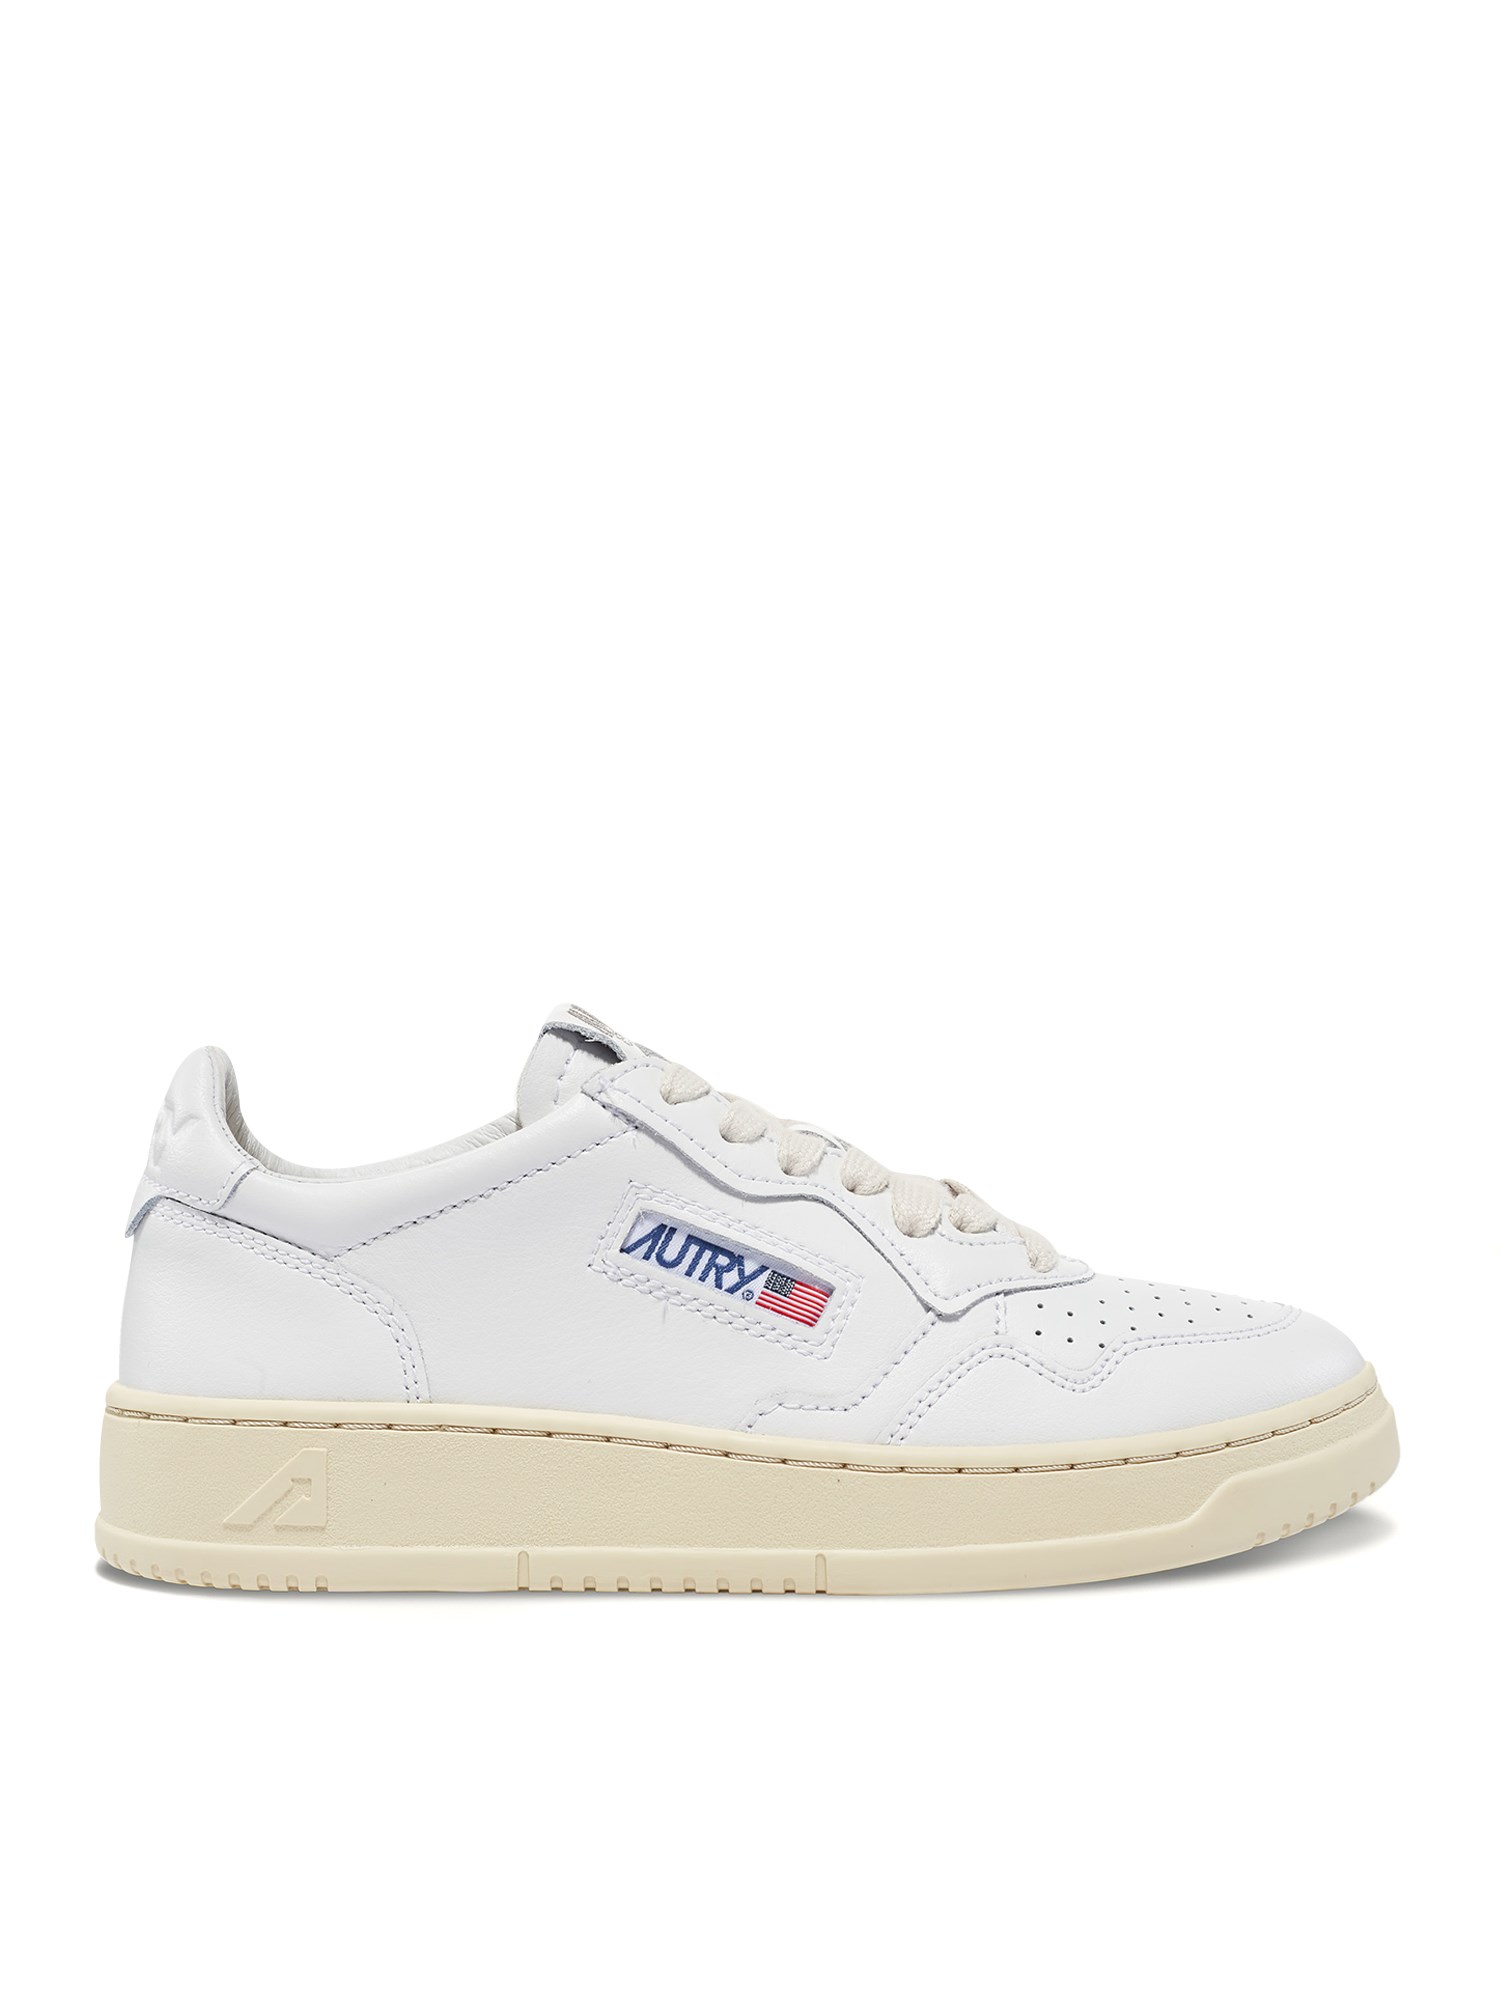 Shop Autry White Medalist Sneakers